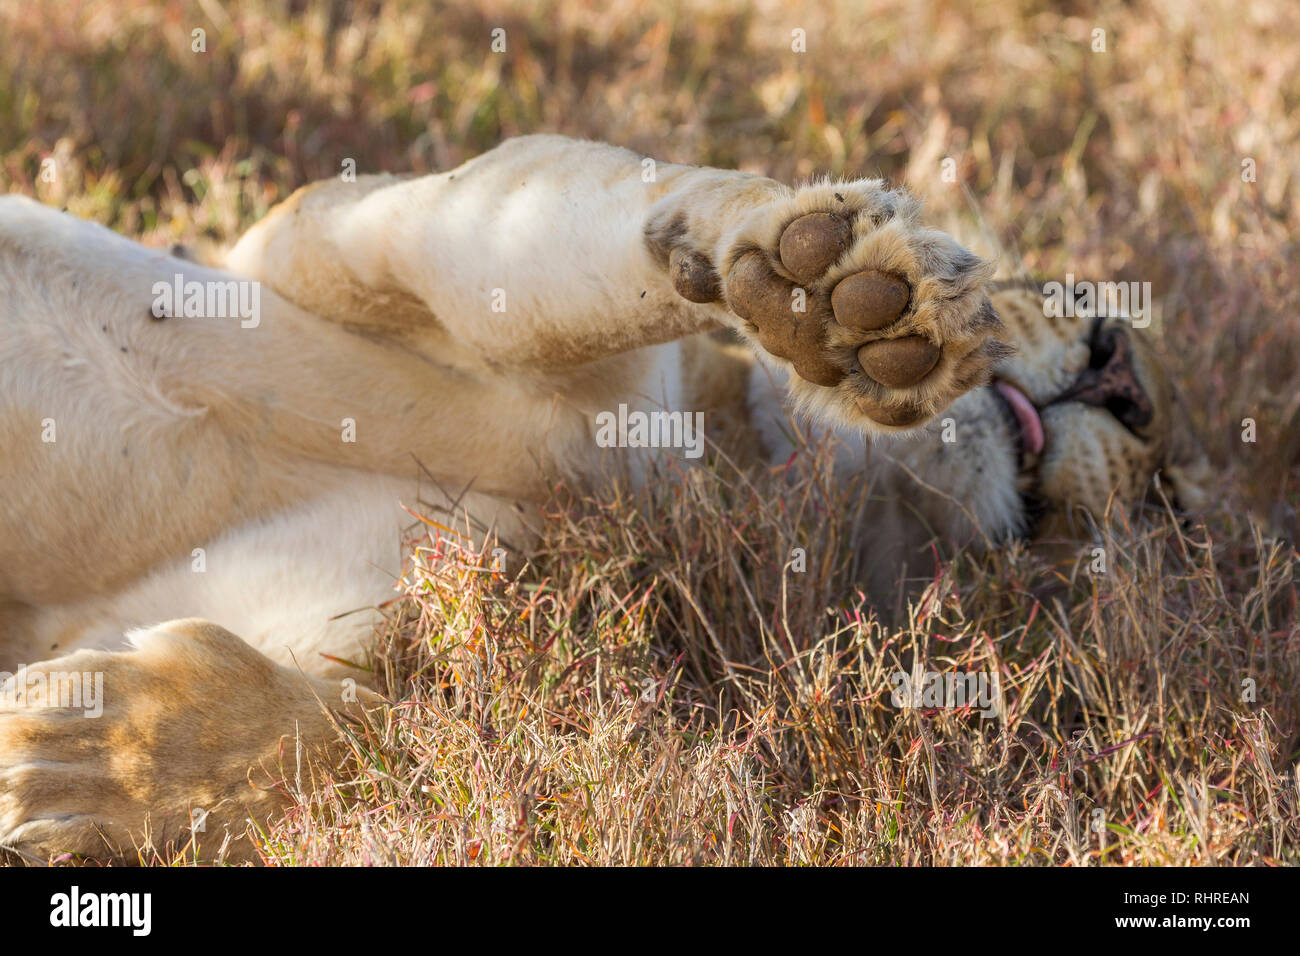 A single female lion in the shade during the day, on it's back with one paw in the air and pad showing, Lewa Conservancy, Lewa, Kenya, Africa Stock Photo